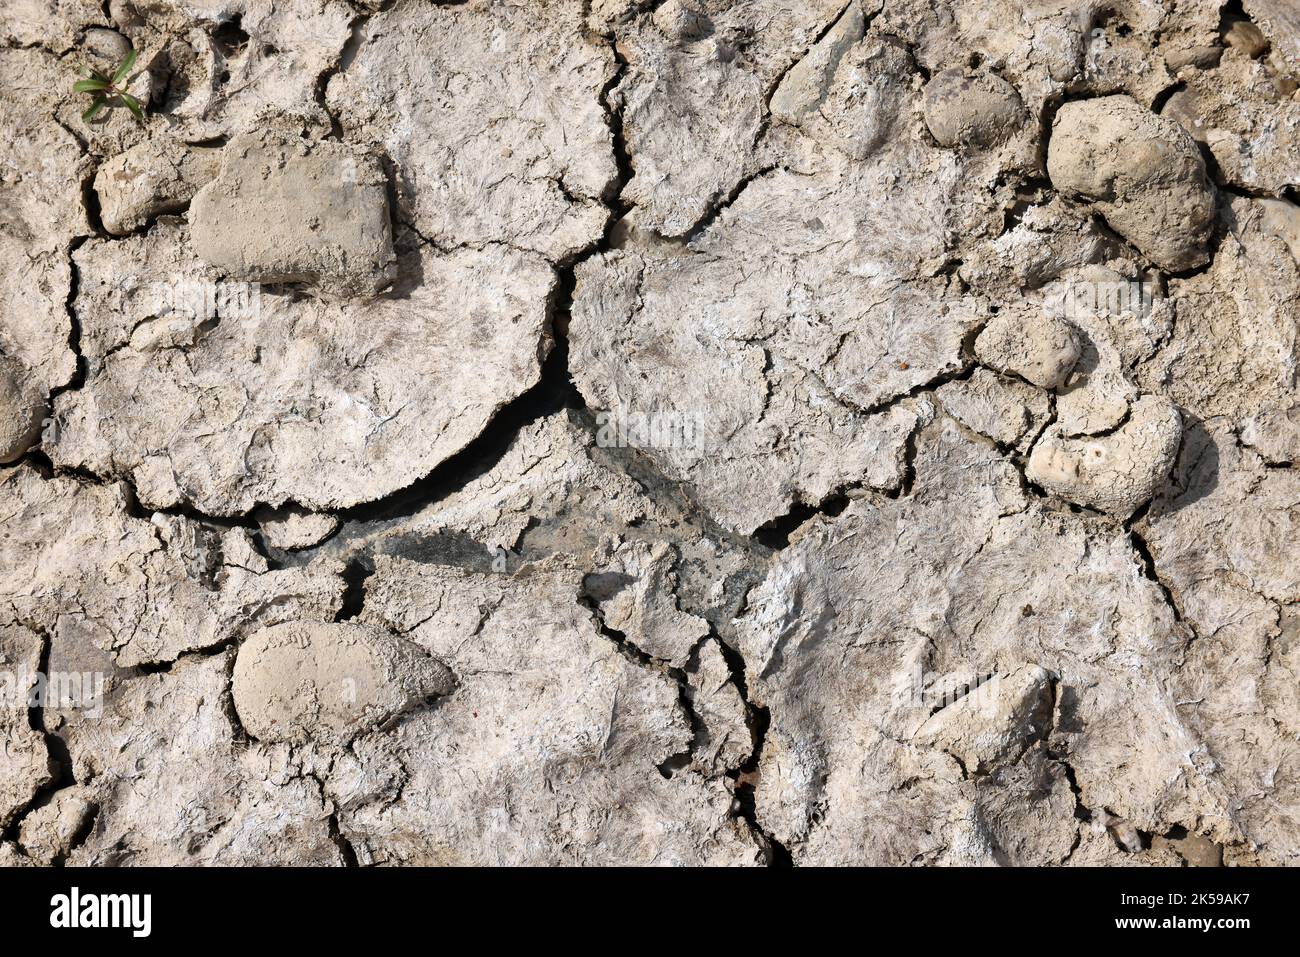 27.07.2022, Germany, North Rhine-Westphalia, Düsseldorf - Dry riverbed in the Rhine. After a long drought, the Rhine level dropped to 71 cm today. Inl Stock Photo